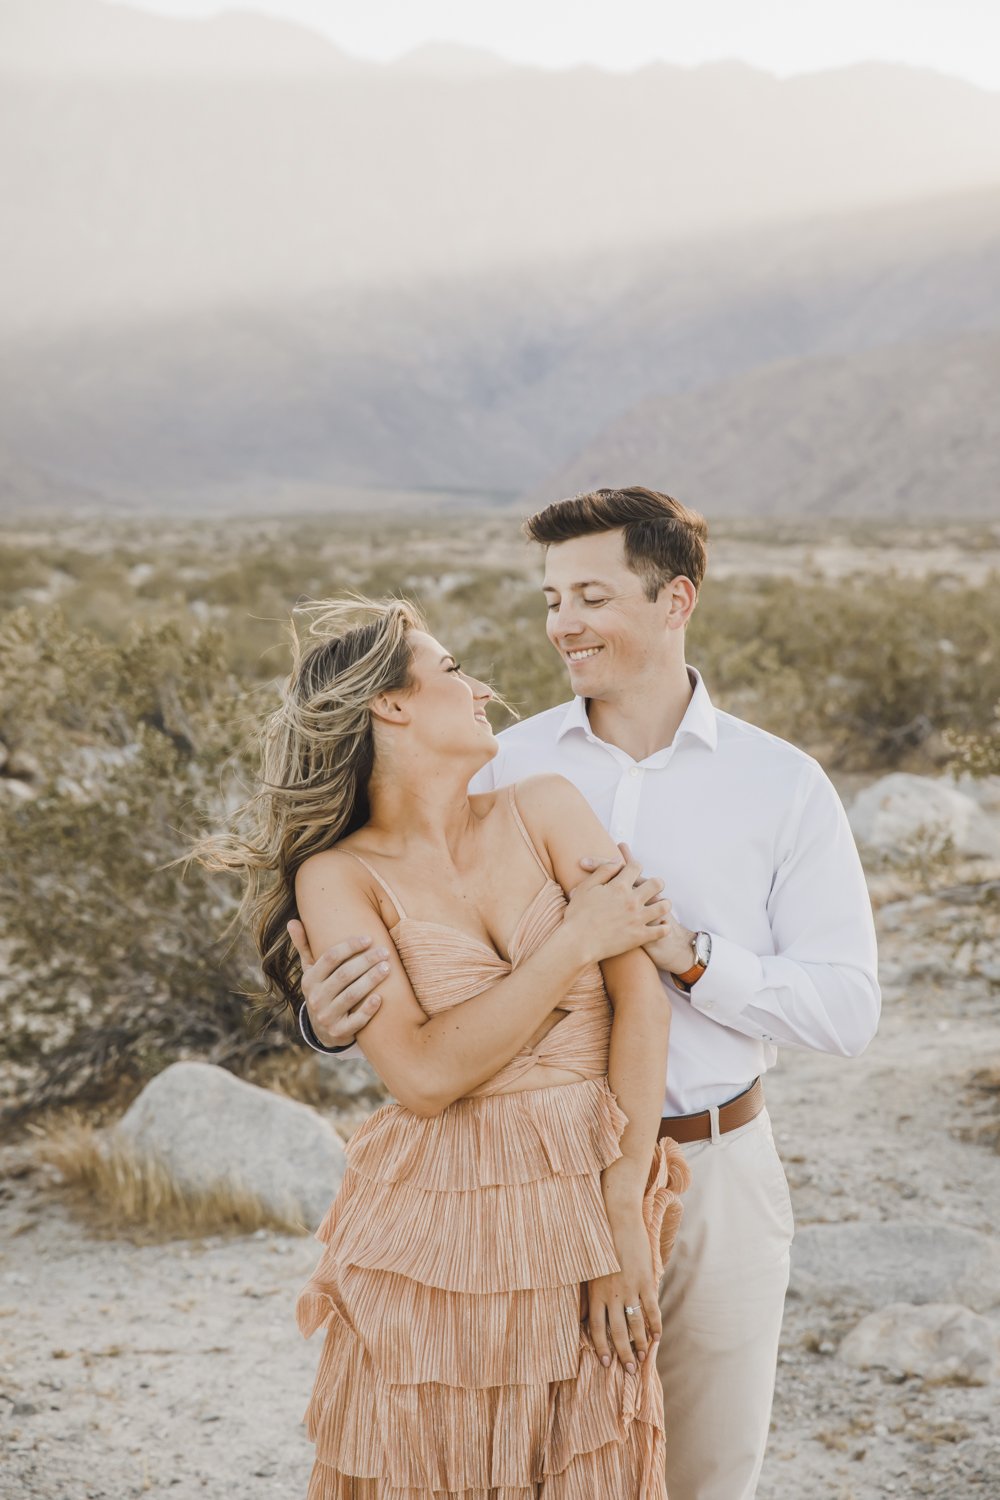 Best Palm Springs Engagement Photography Session Locations: Windmills ...